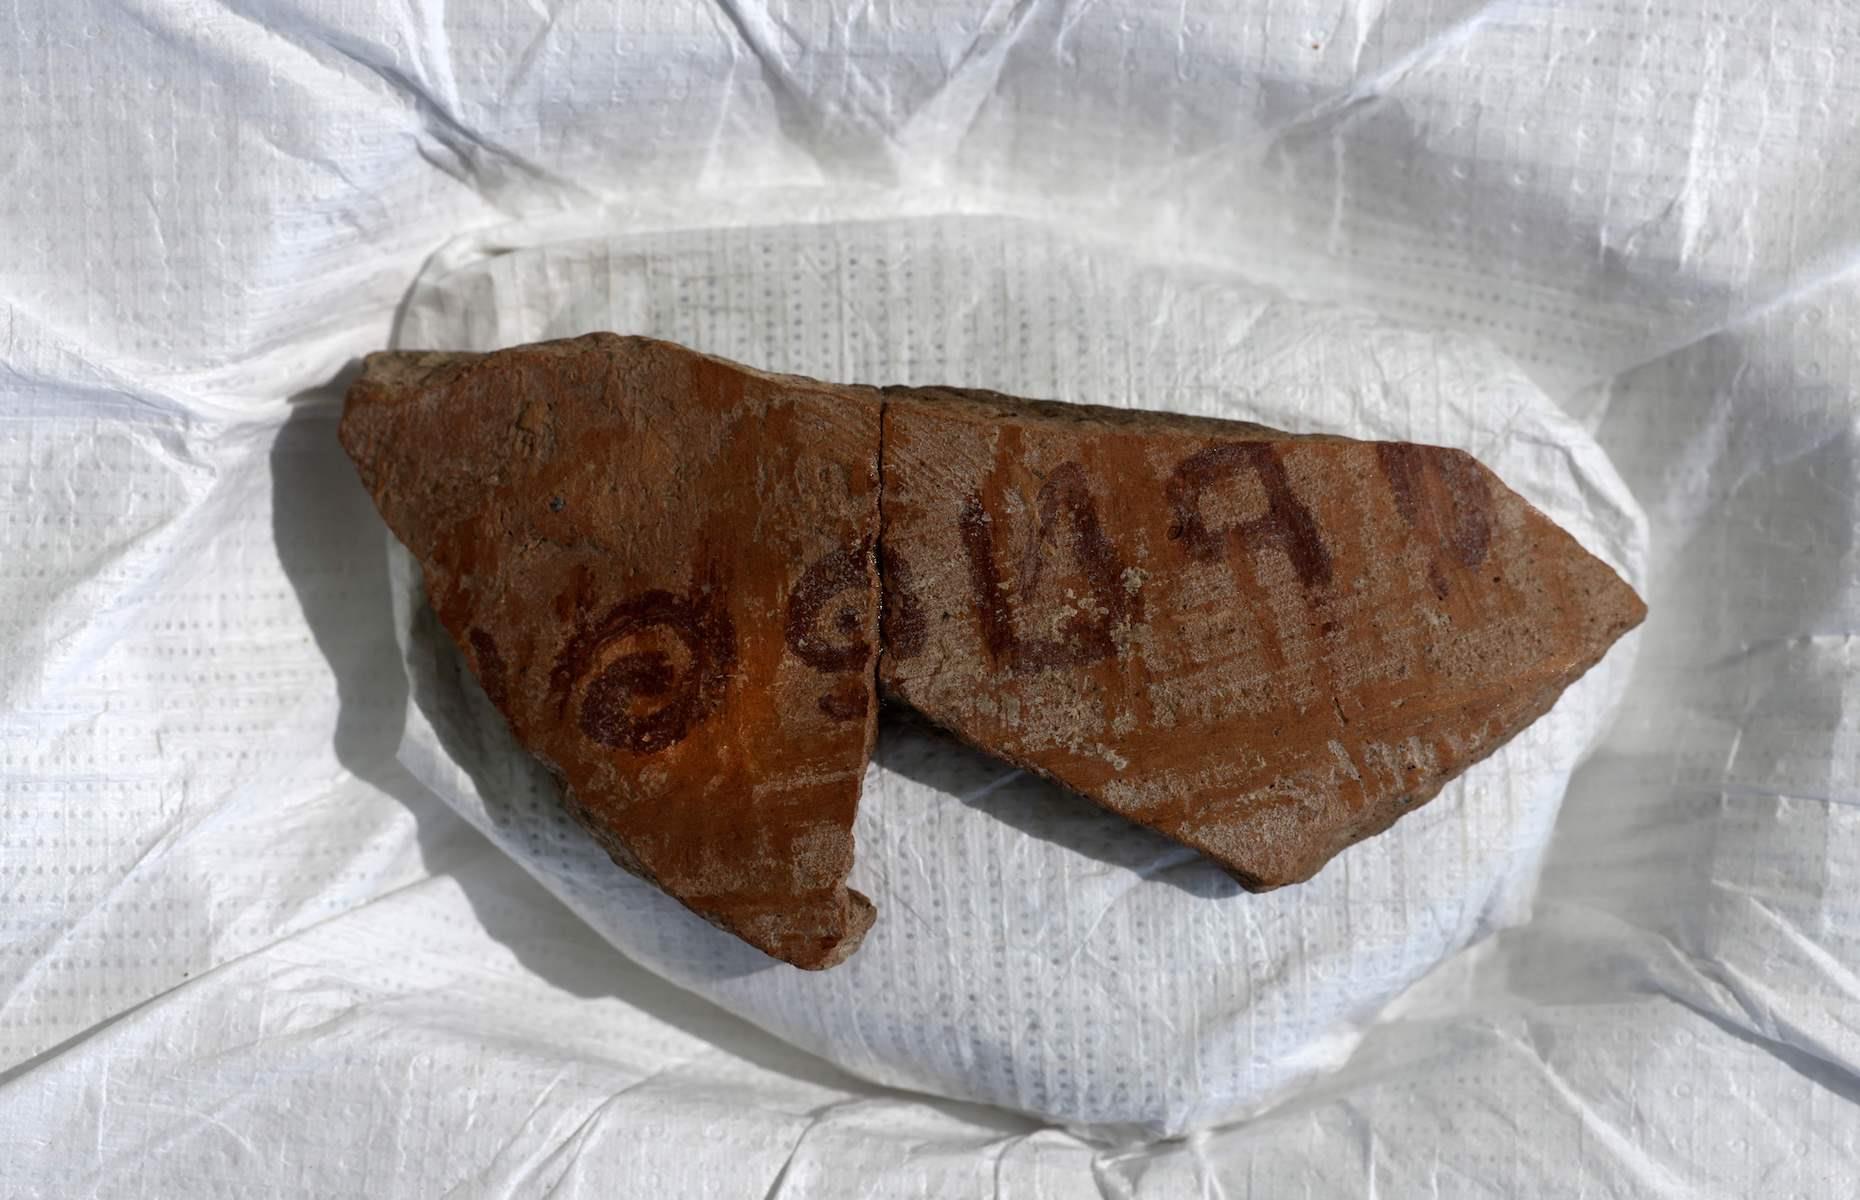 <p>Also in Israel, <a href="https://www.smithsonianmag.com/smart-news/3000-year-old-jug-holds-name-biblical-judge-180978159/">a biblical-era inscription written in ink</a> on a pottery vessel in Canaanite alphabetic script was found inside a storage pit at Khirbet er-Ra‘I archaeological site in July 2021. Bearing the name of the biblical judge Jerubbaal, it dates from around 1,100 BC and is the first time his name has been found at an archaeological site. The fragment is from a small jug that most likely carried precious liquids such as scented oil. Inscriptions from the biblical period are extremely rare.</p>